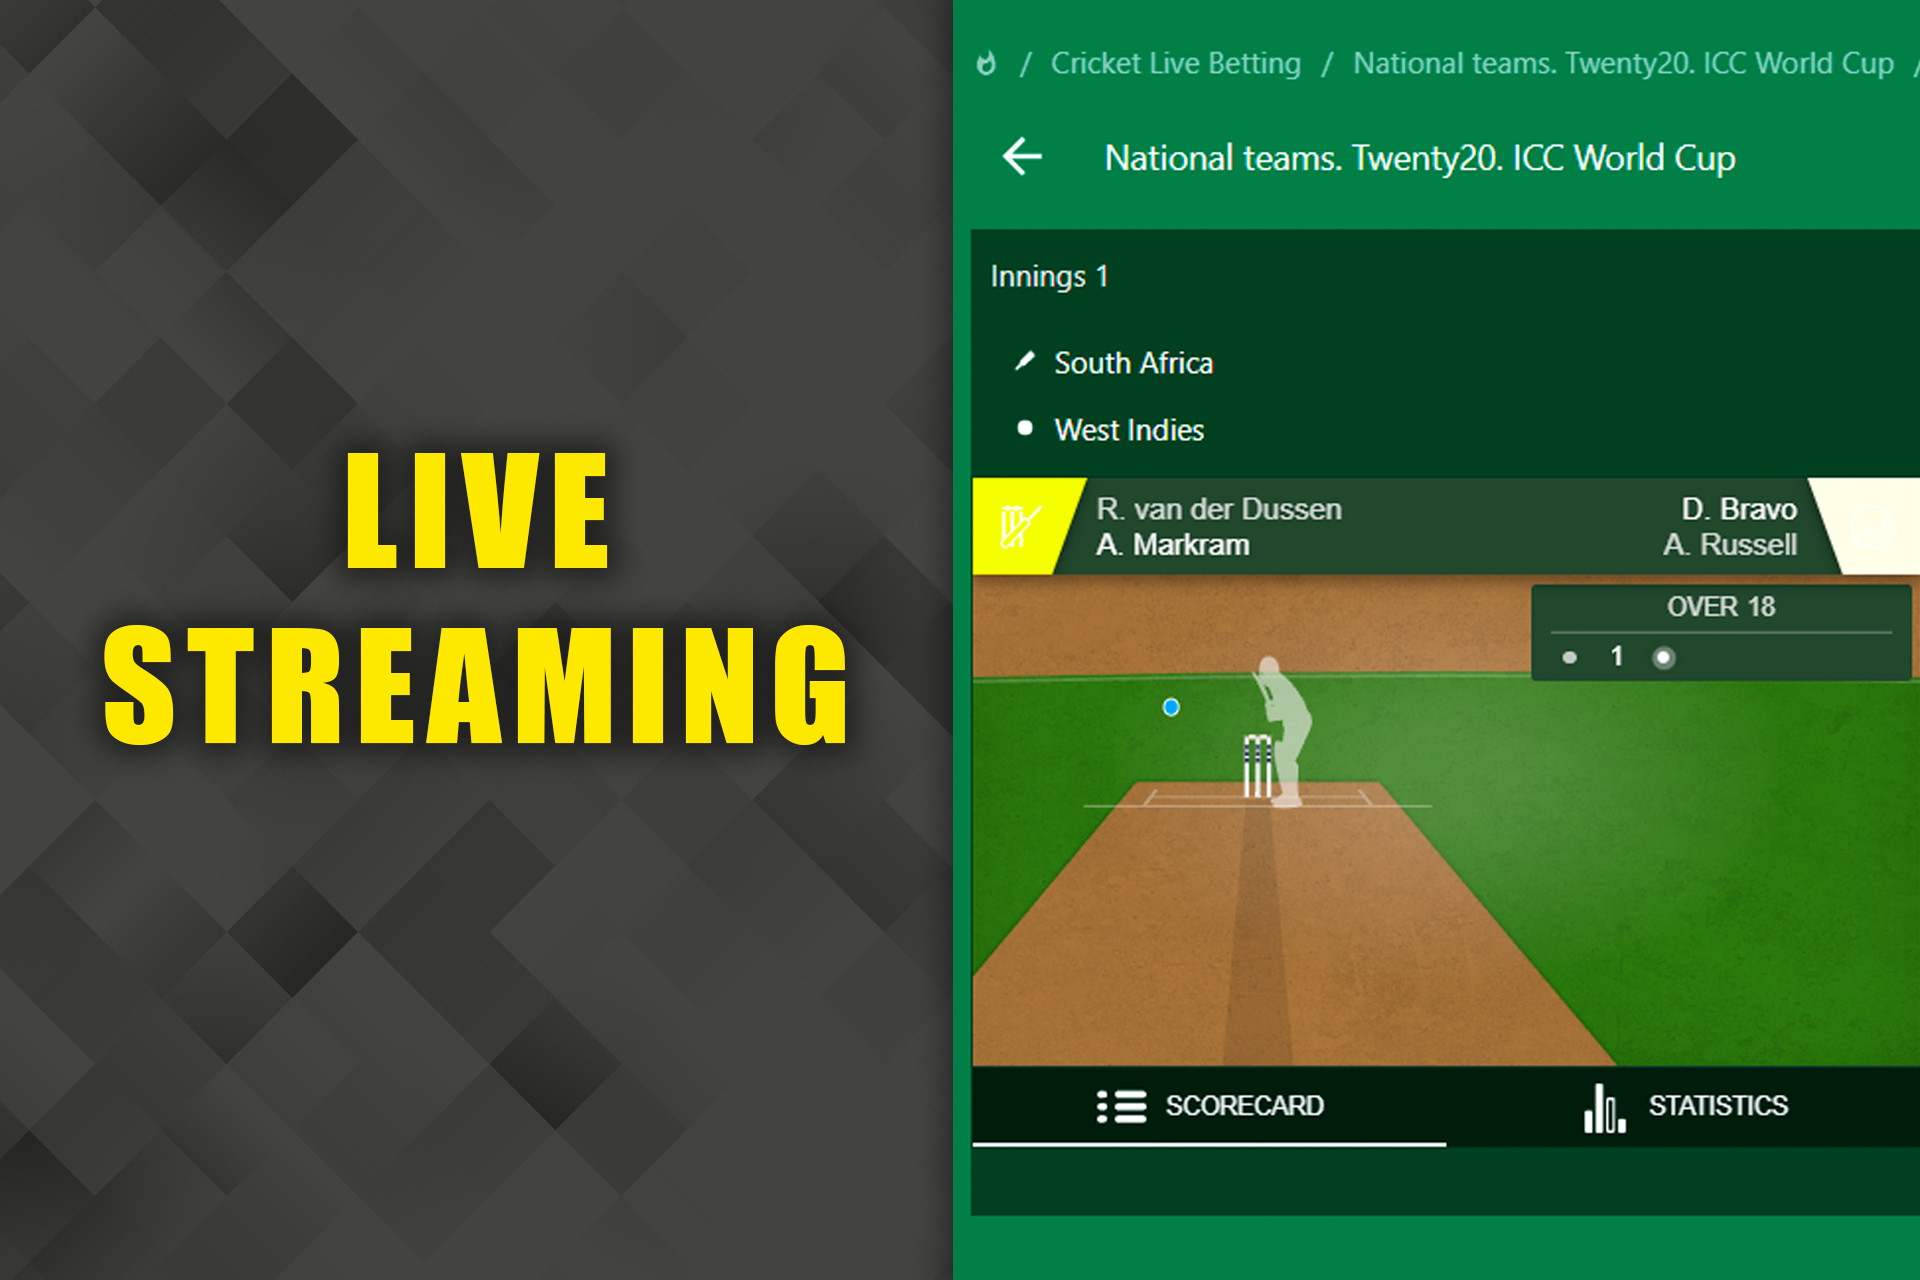 If you open the match page in the app, you can watch the broadcasting online.